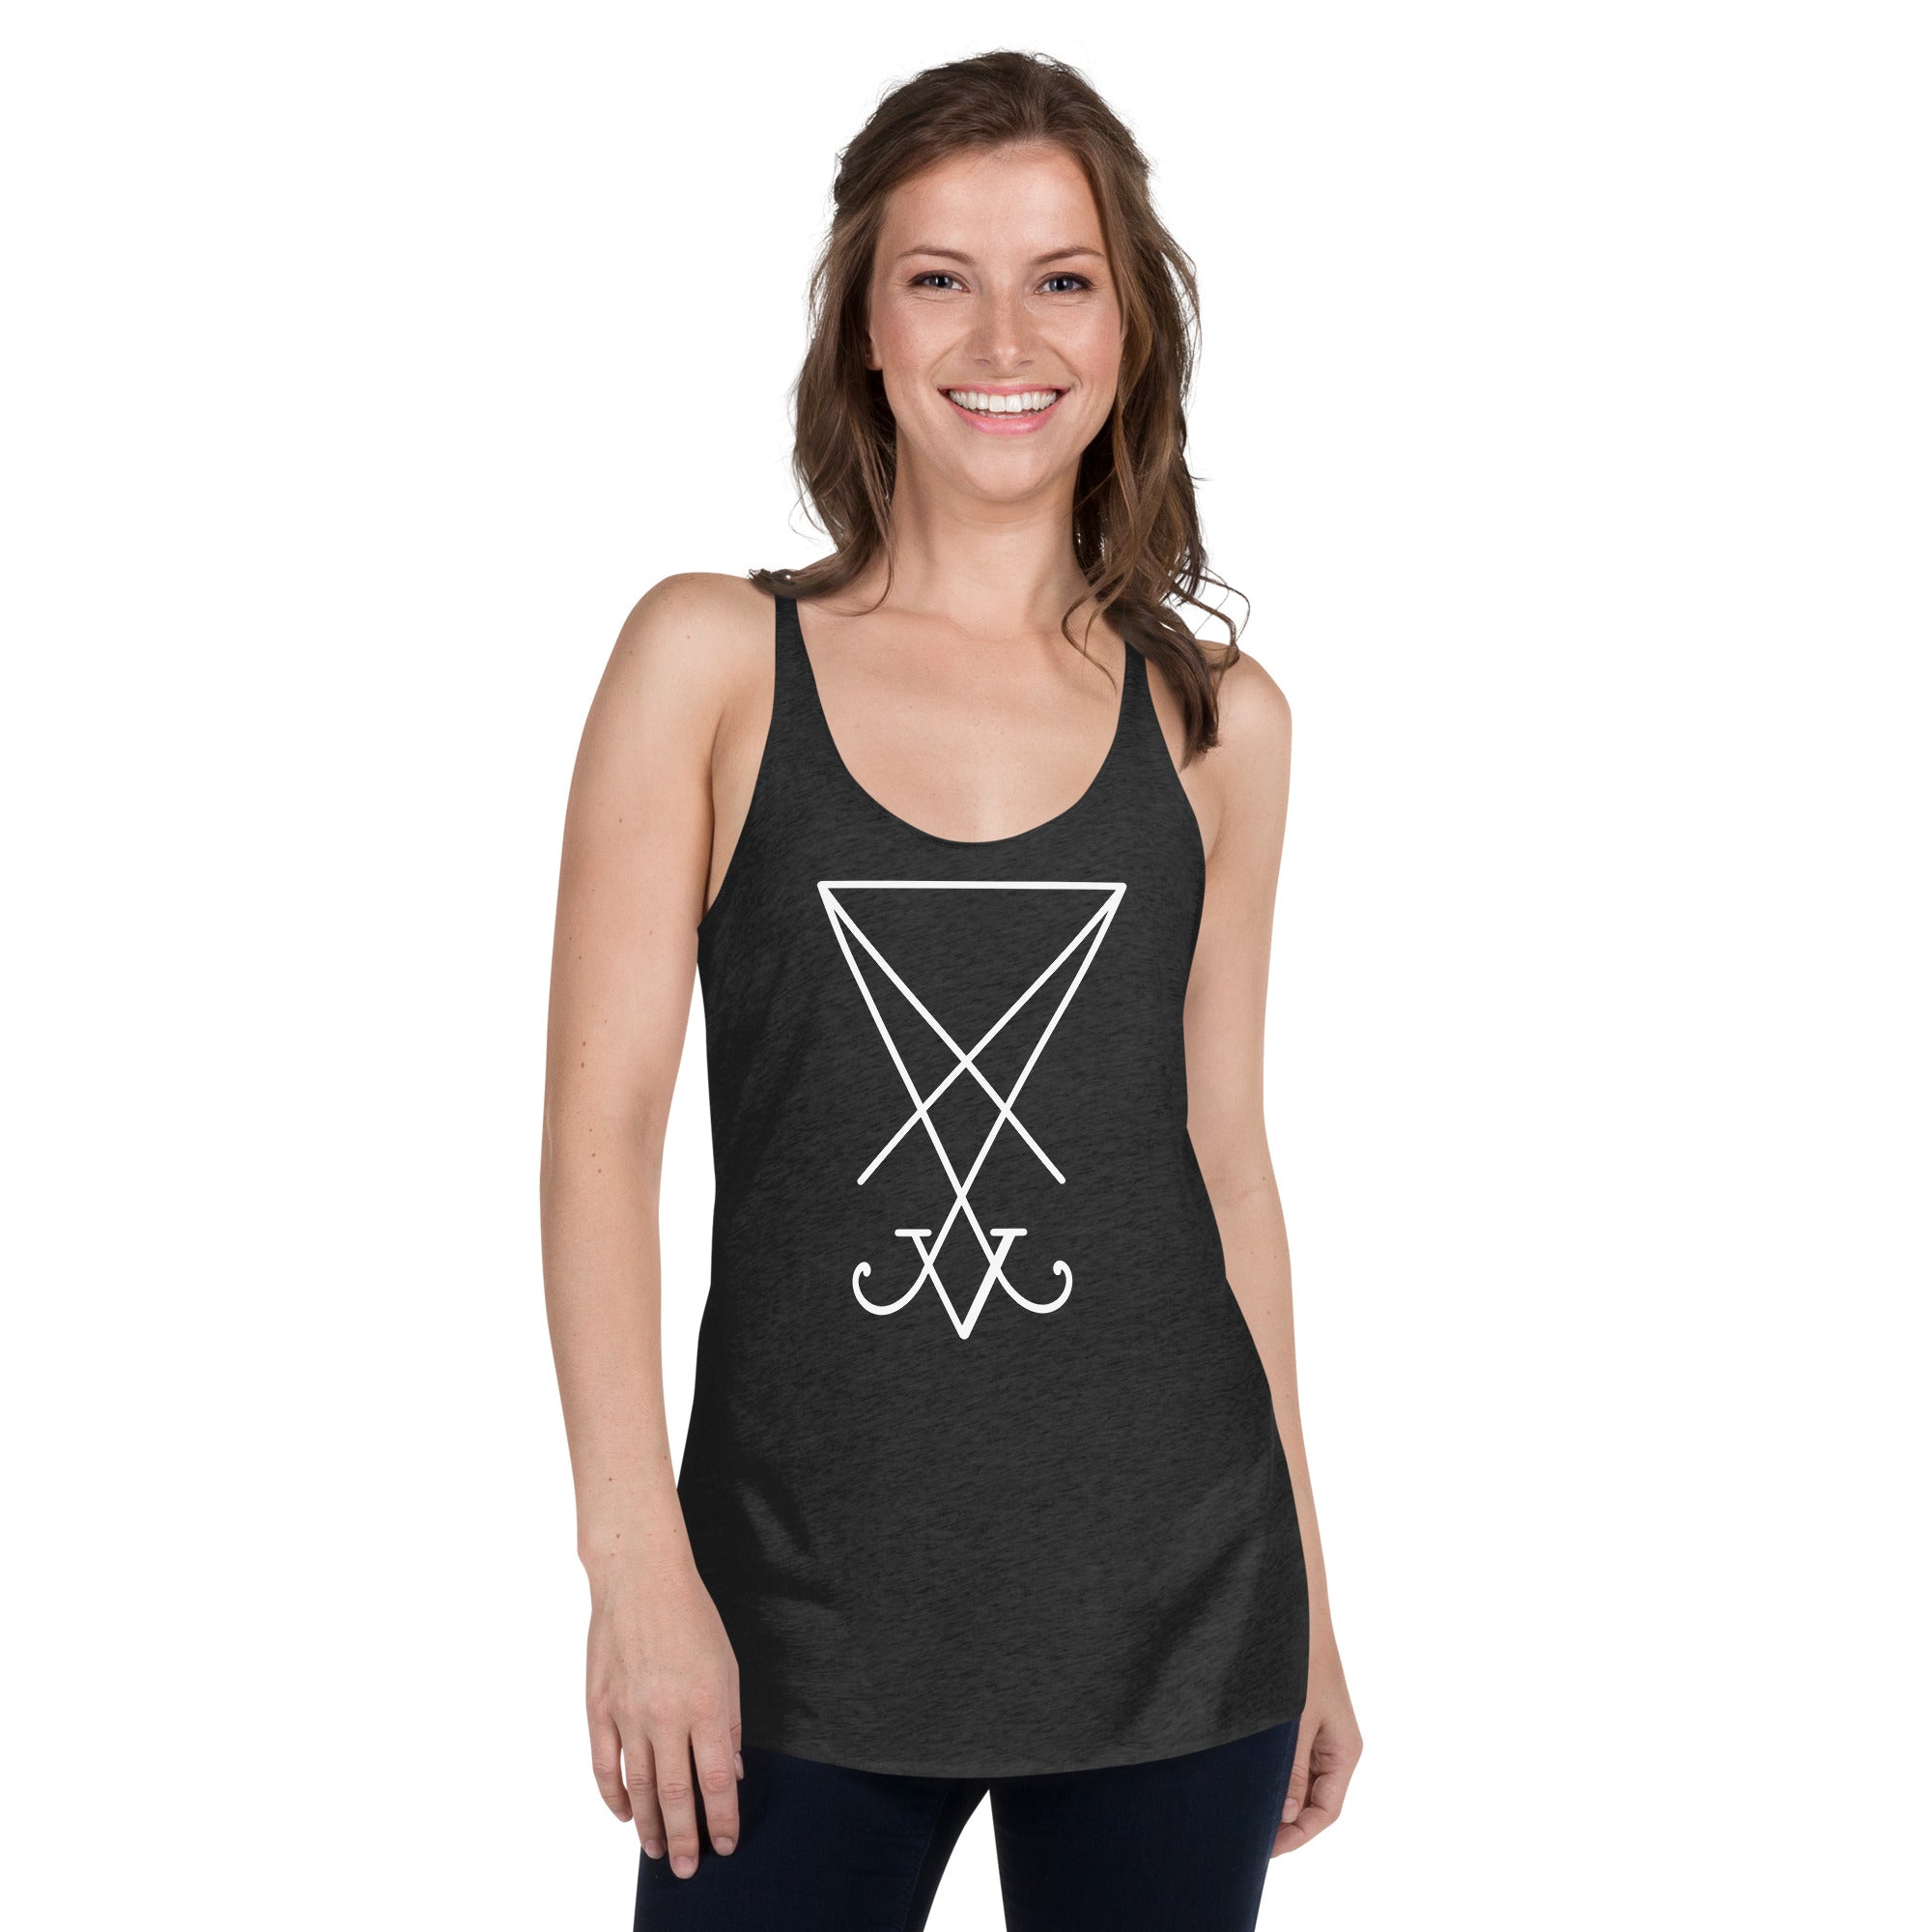 White Sigil of Lucifer (Seal of Satan) The Grimoire of Truth Women's Racerback Tank Top Shirt